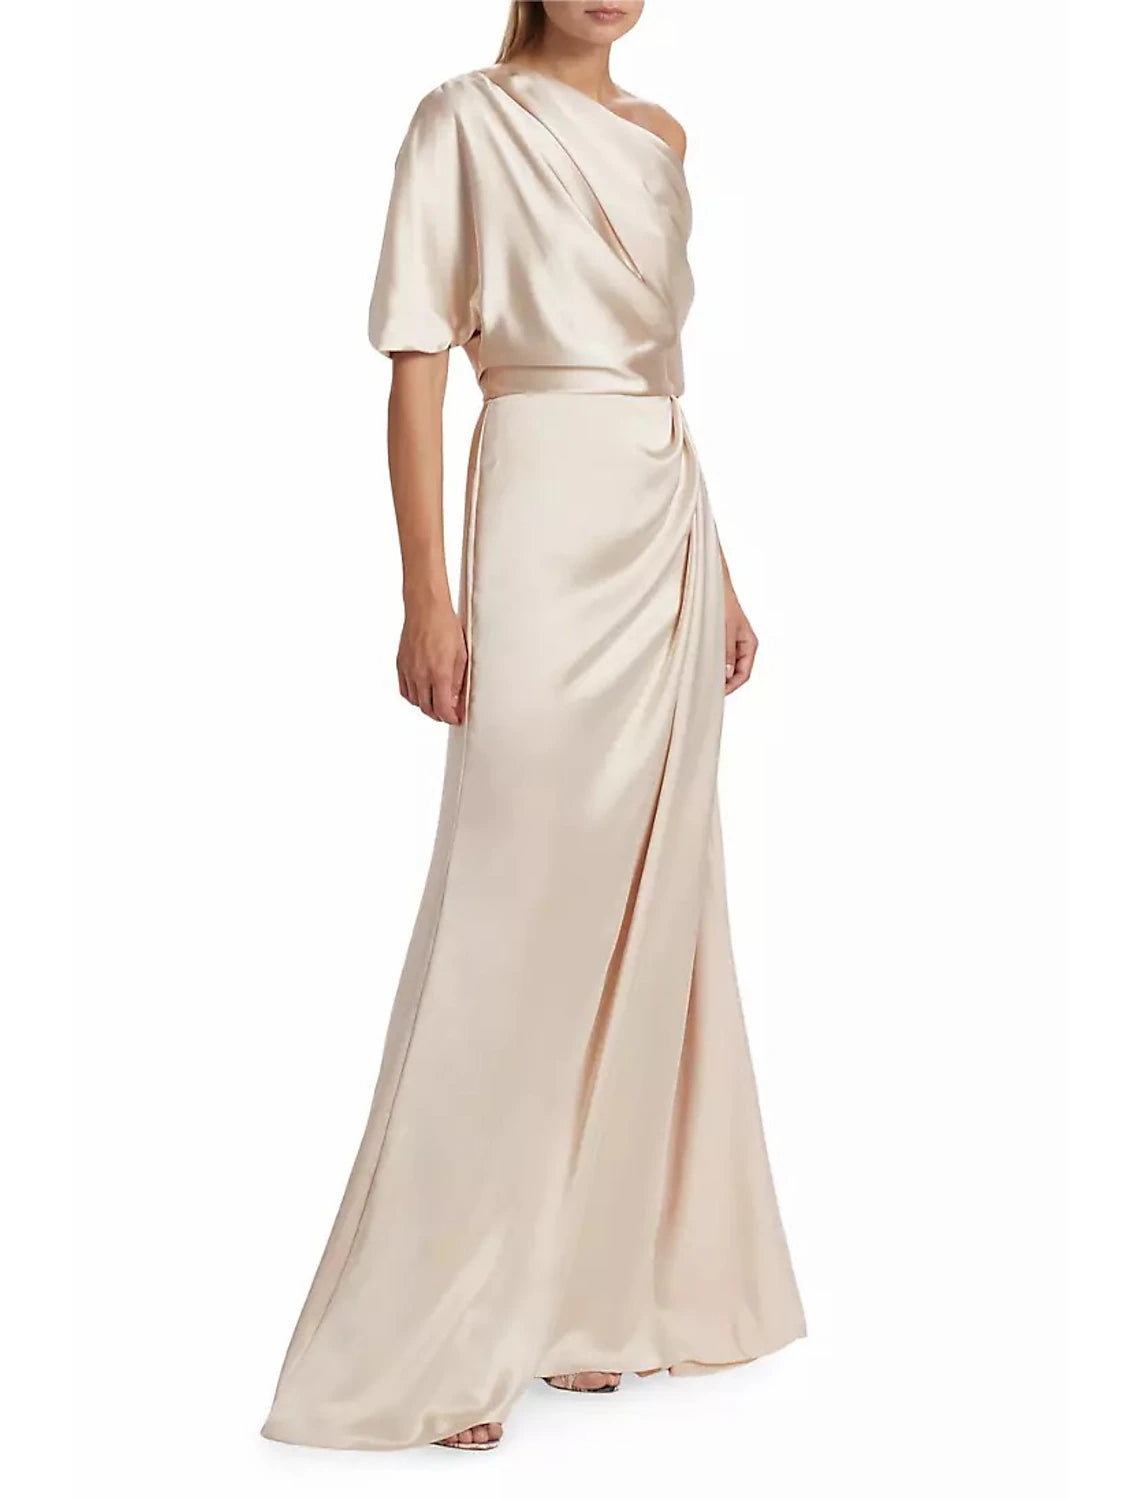 Wholesa A-Line Mother of the Bride Dress Formal Wedding Guest Elegant Simple Off Shoulder Floor Length Charmeuse Short Sleeve with Side Draping Side-Draped Solid Color